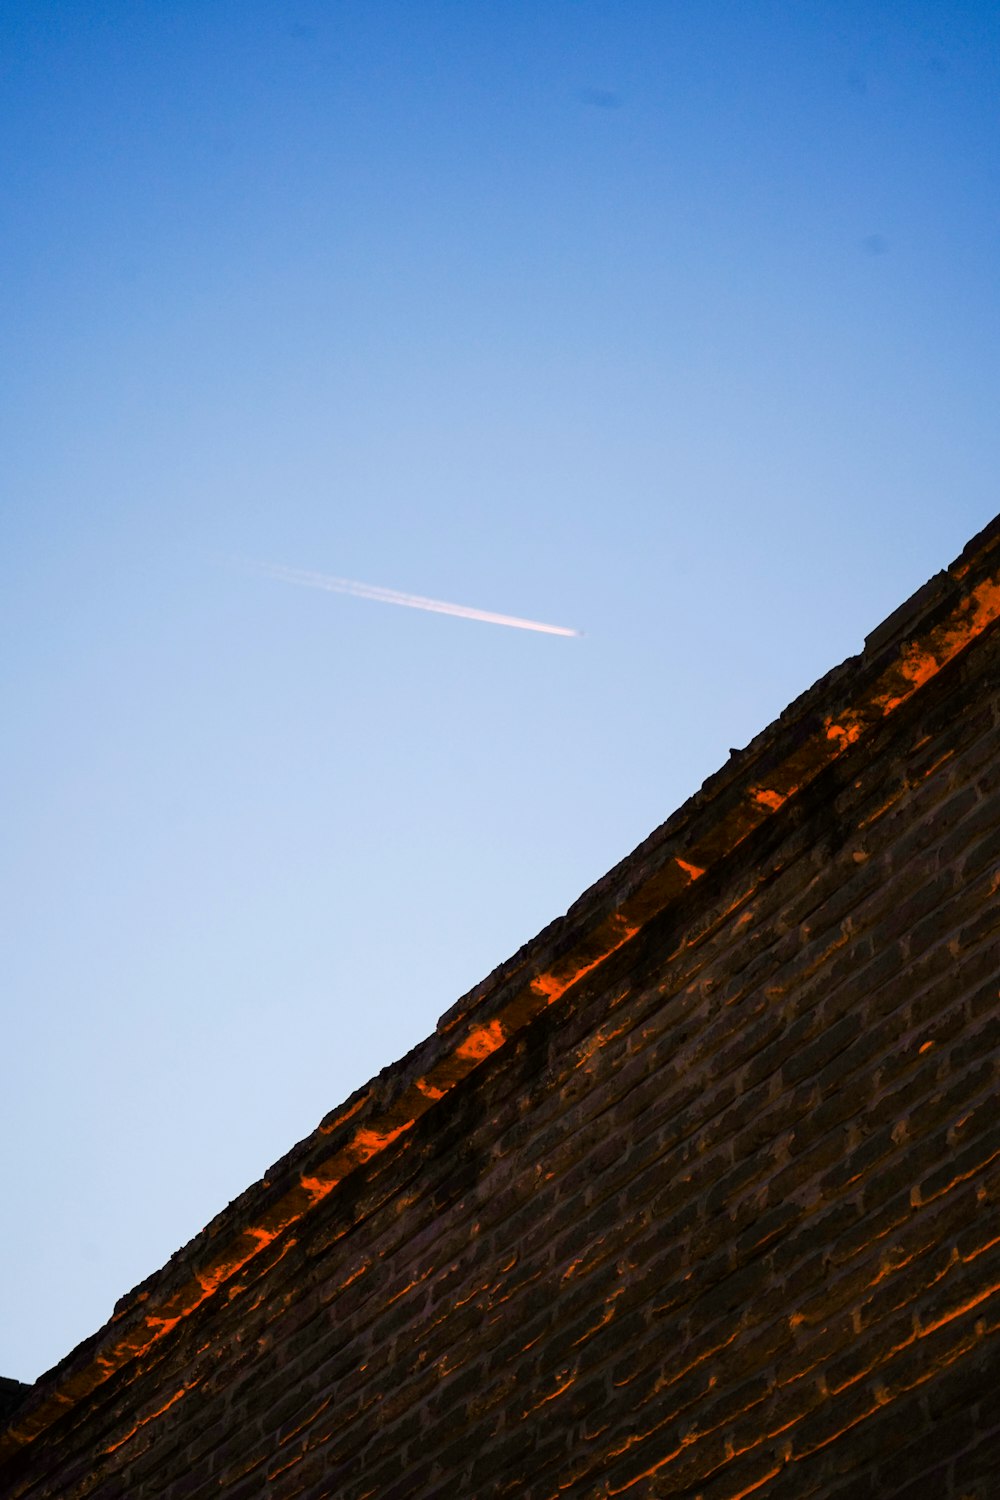 a jet flying over a brick wall under a blue sky